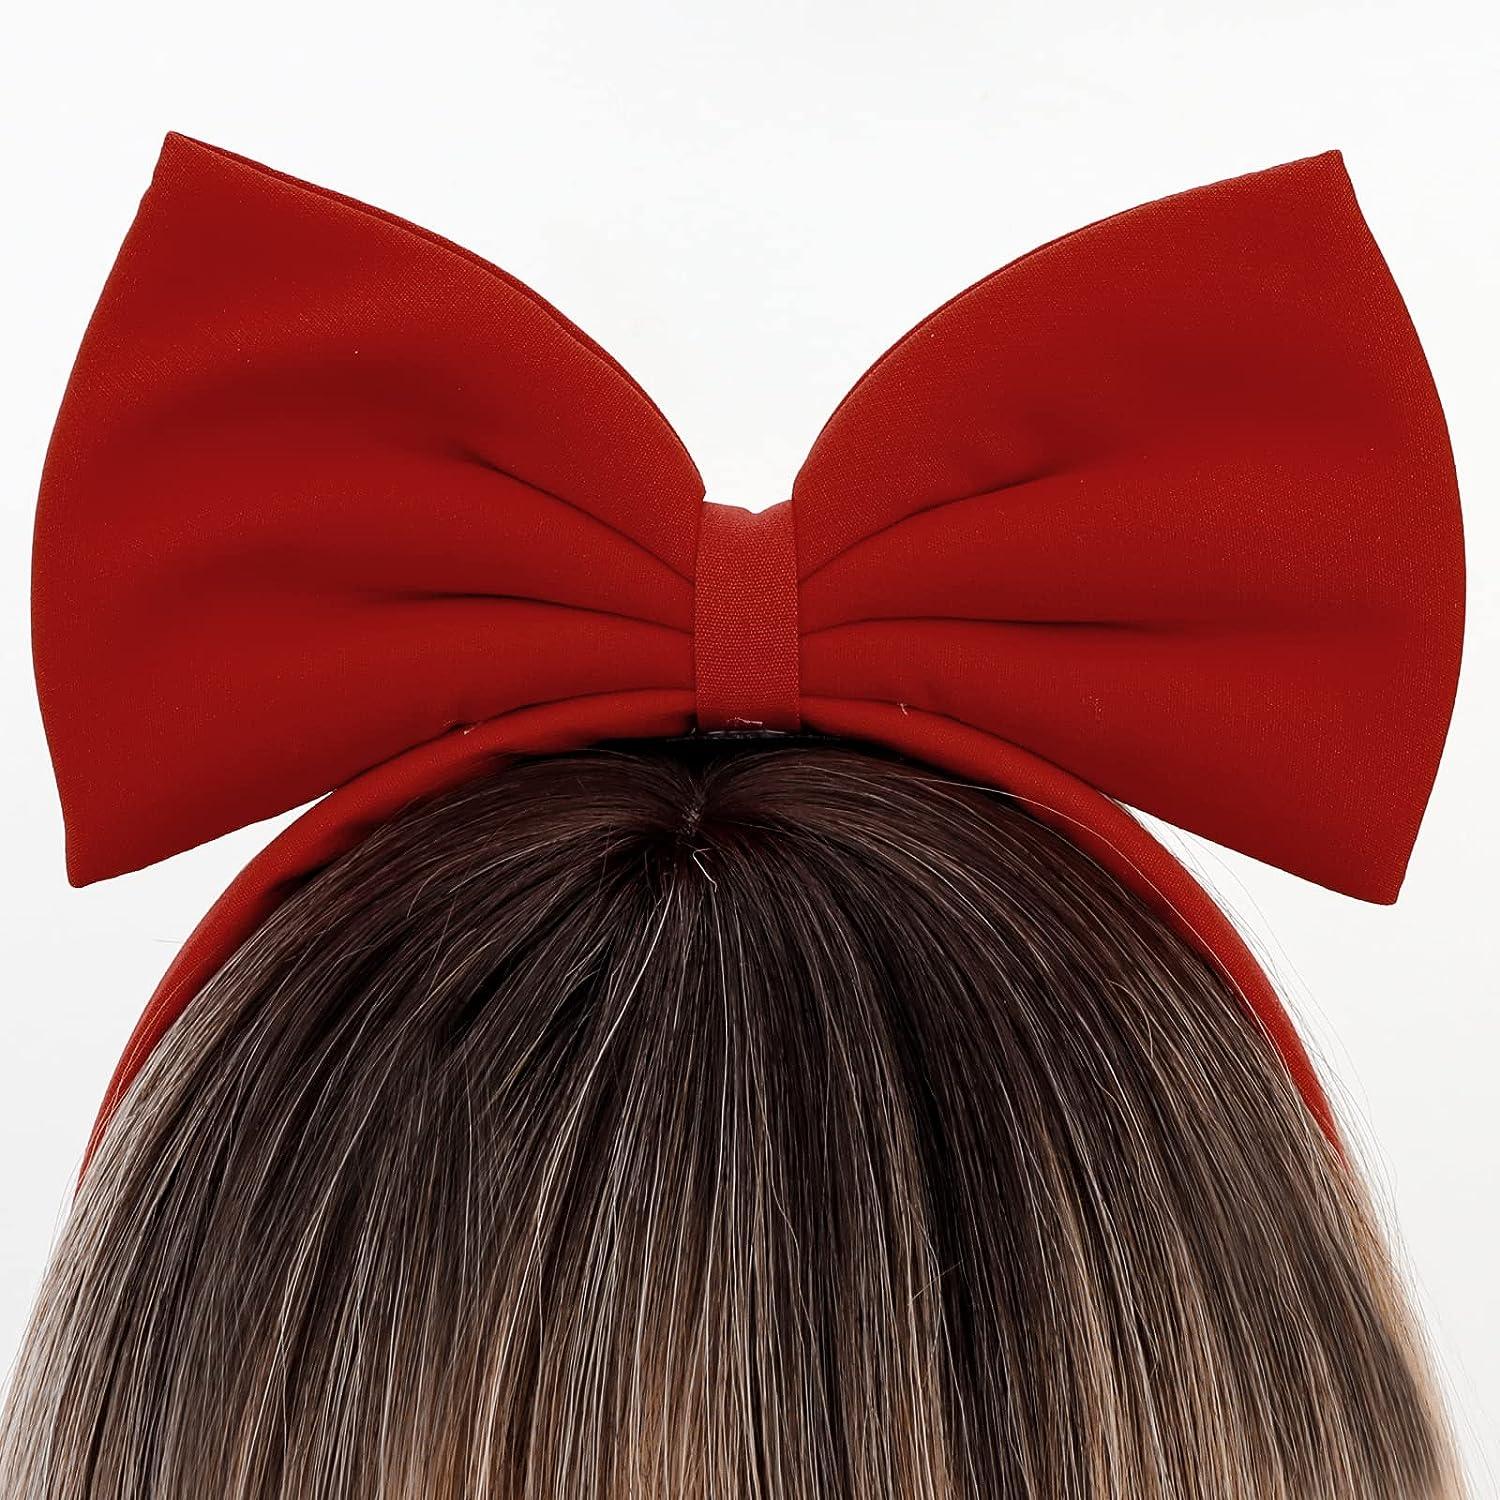  Ivyu Red Bow Headband Women Big Red Bow For Hair Blossom  Powerpuff Girls Bow Snow White Bow Kiki Large Red Hair Bow Band Halloween  Headbands For Women Adults Girls 